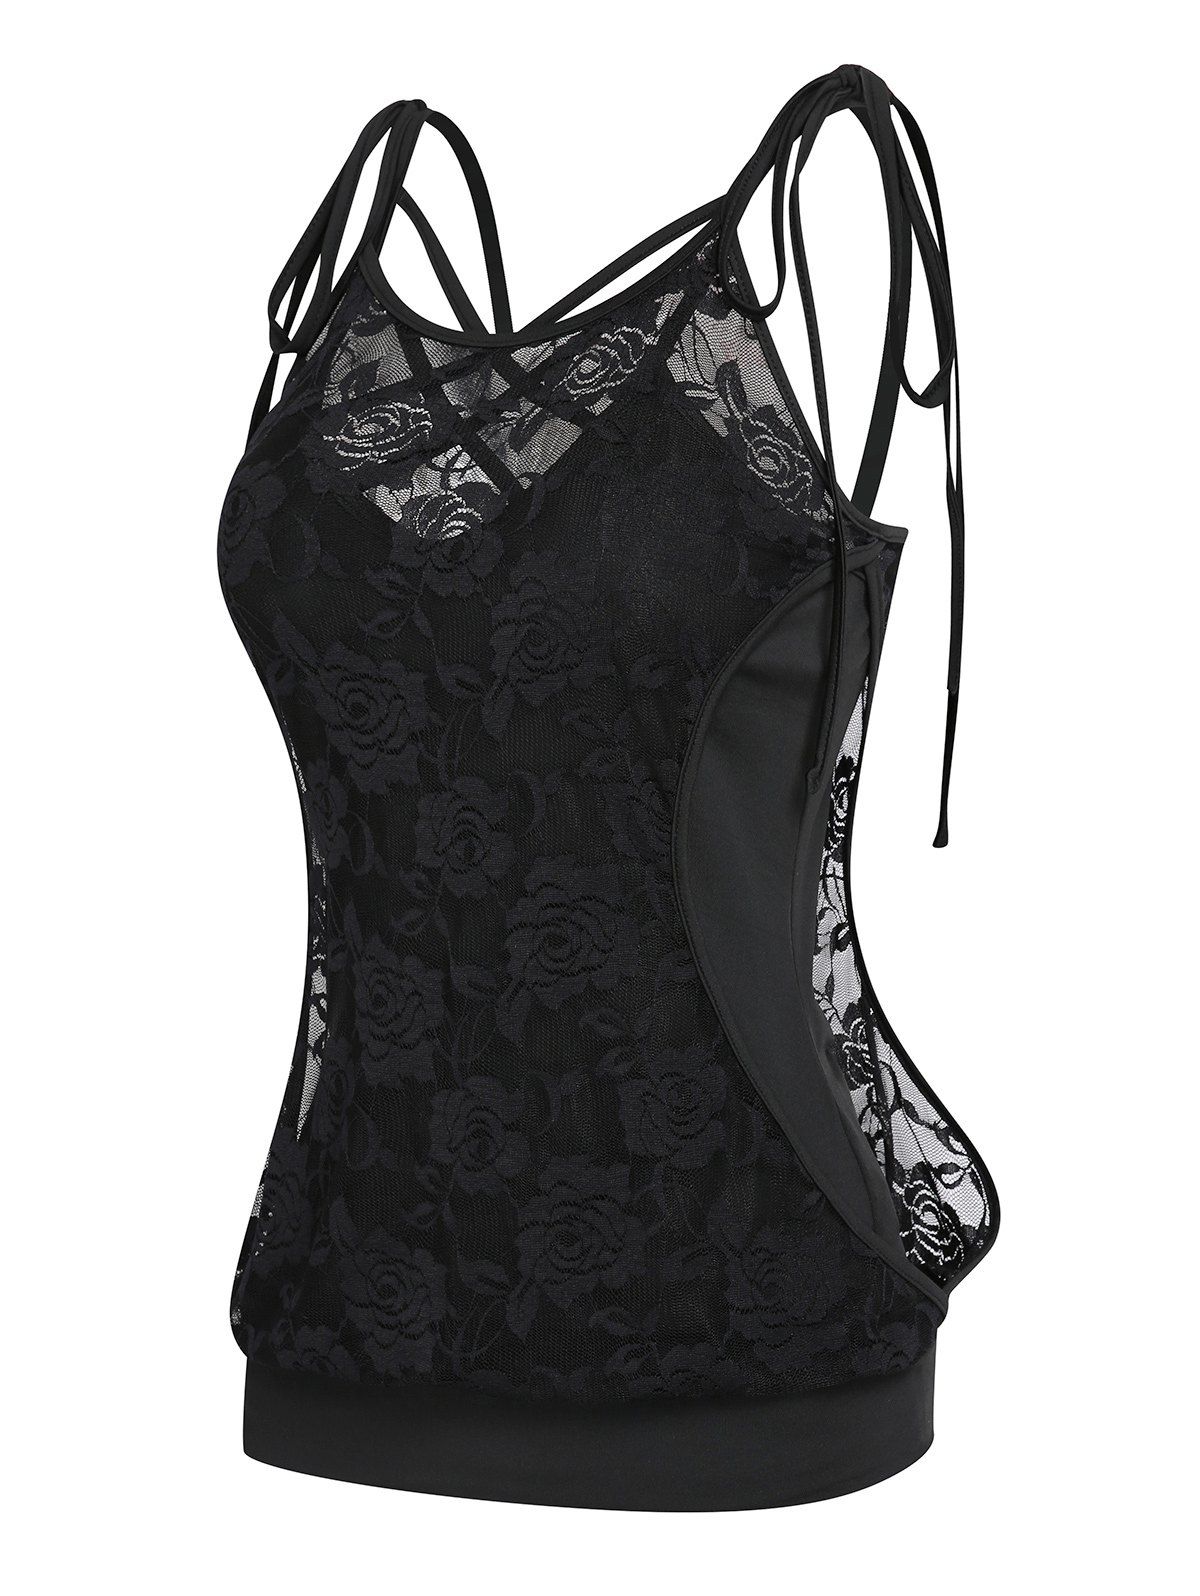 Crisscross Plain Floral Lace Sleeveless Tie Up Two Pieces Cami Top - BLACK M